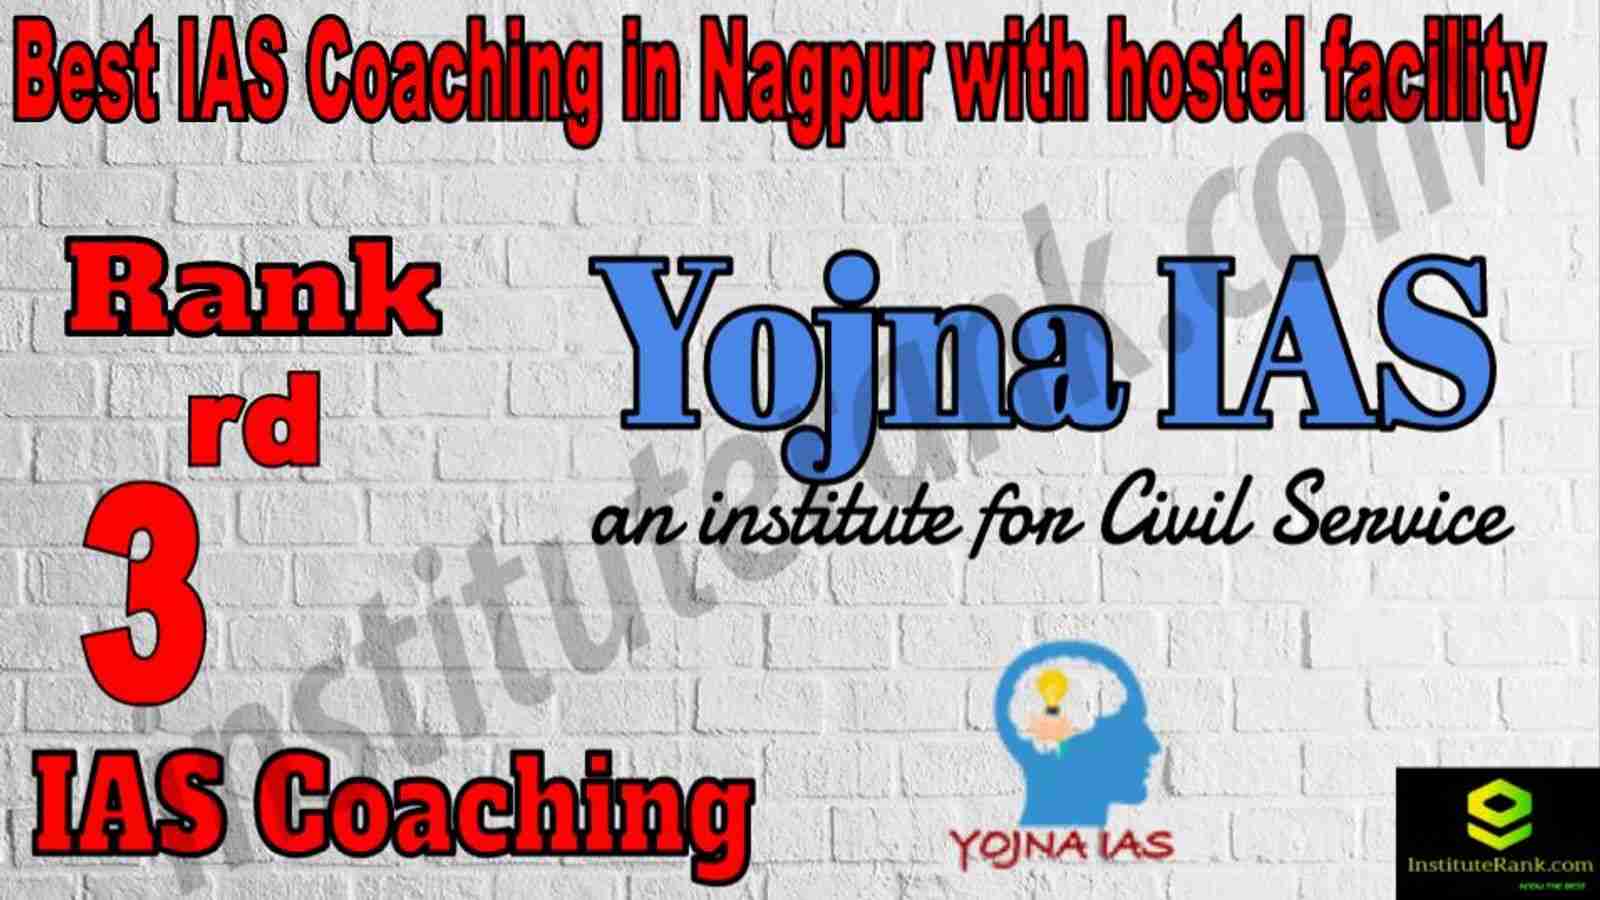 3rd Best IAS Coaching in Nagpur with hostel facility